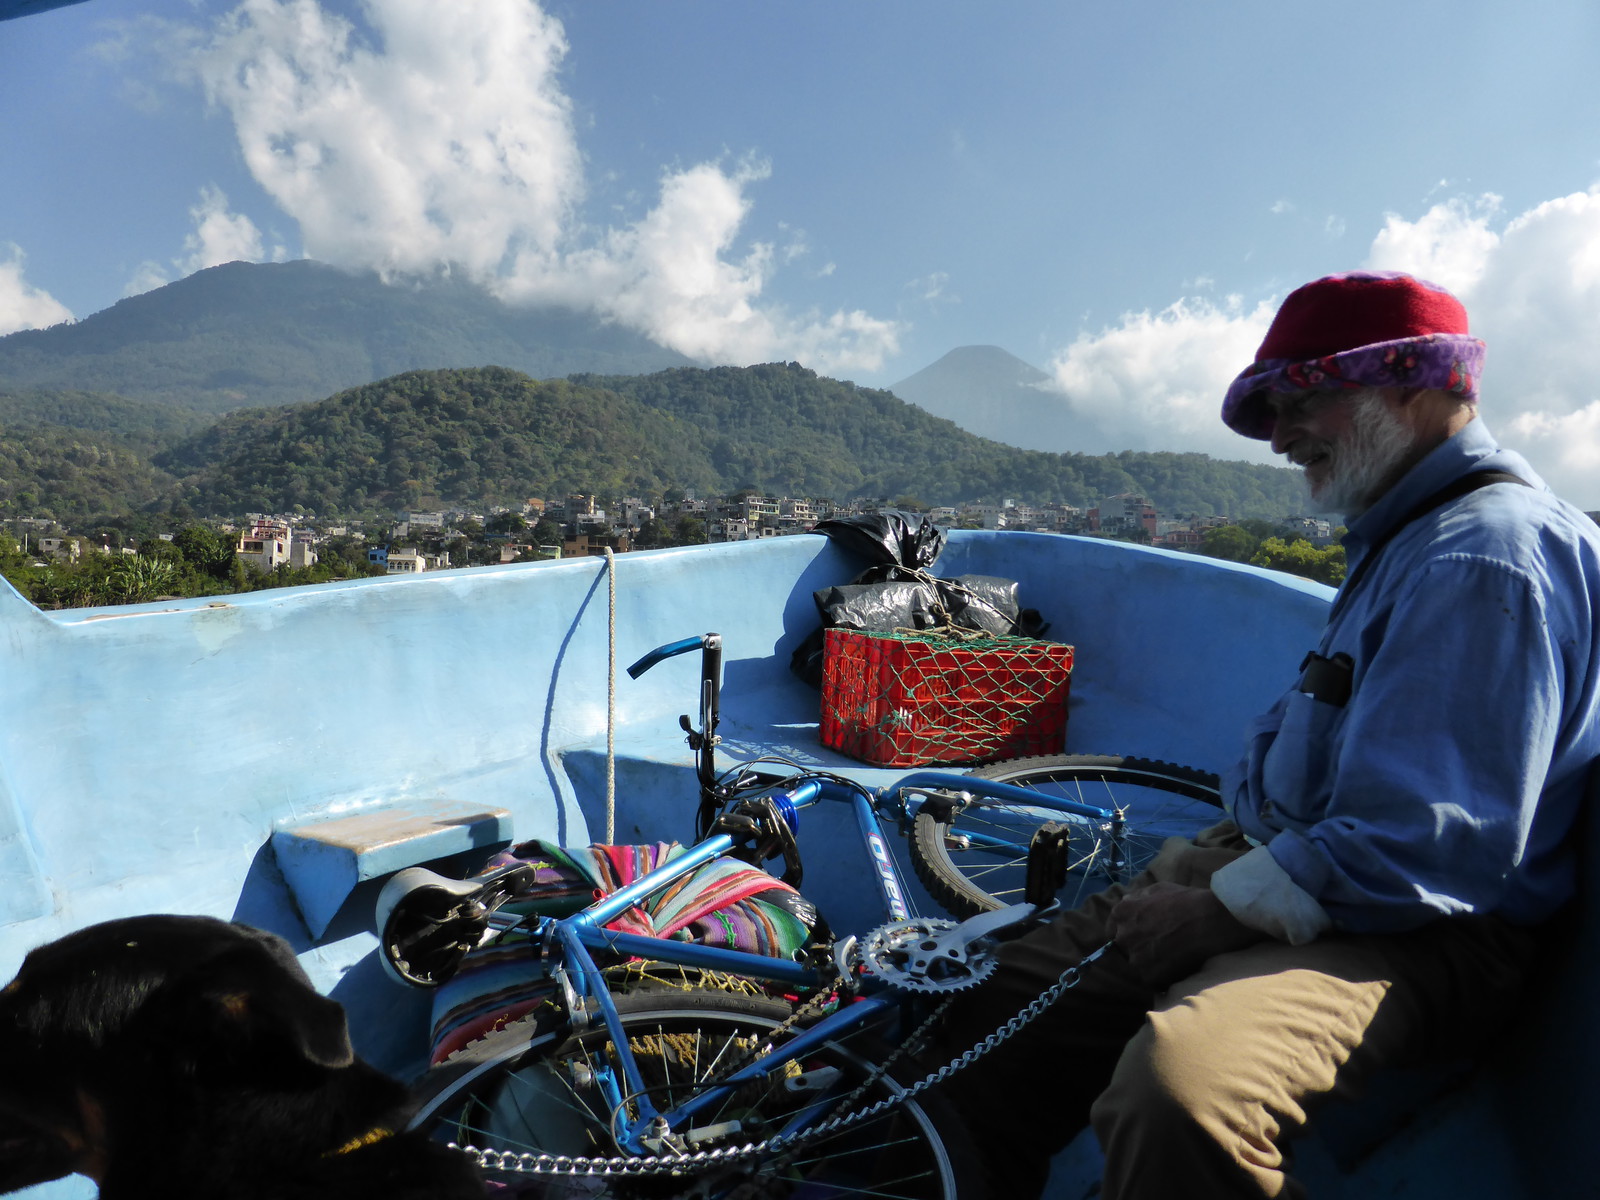 On the launch to Santiago Atitlán, where there's room for everyone, including an old man, his dogs and his bicycle